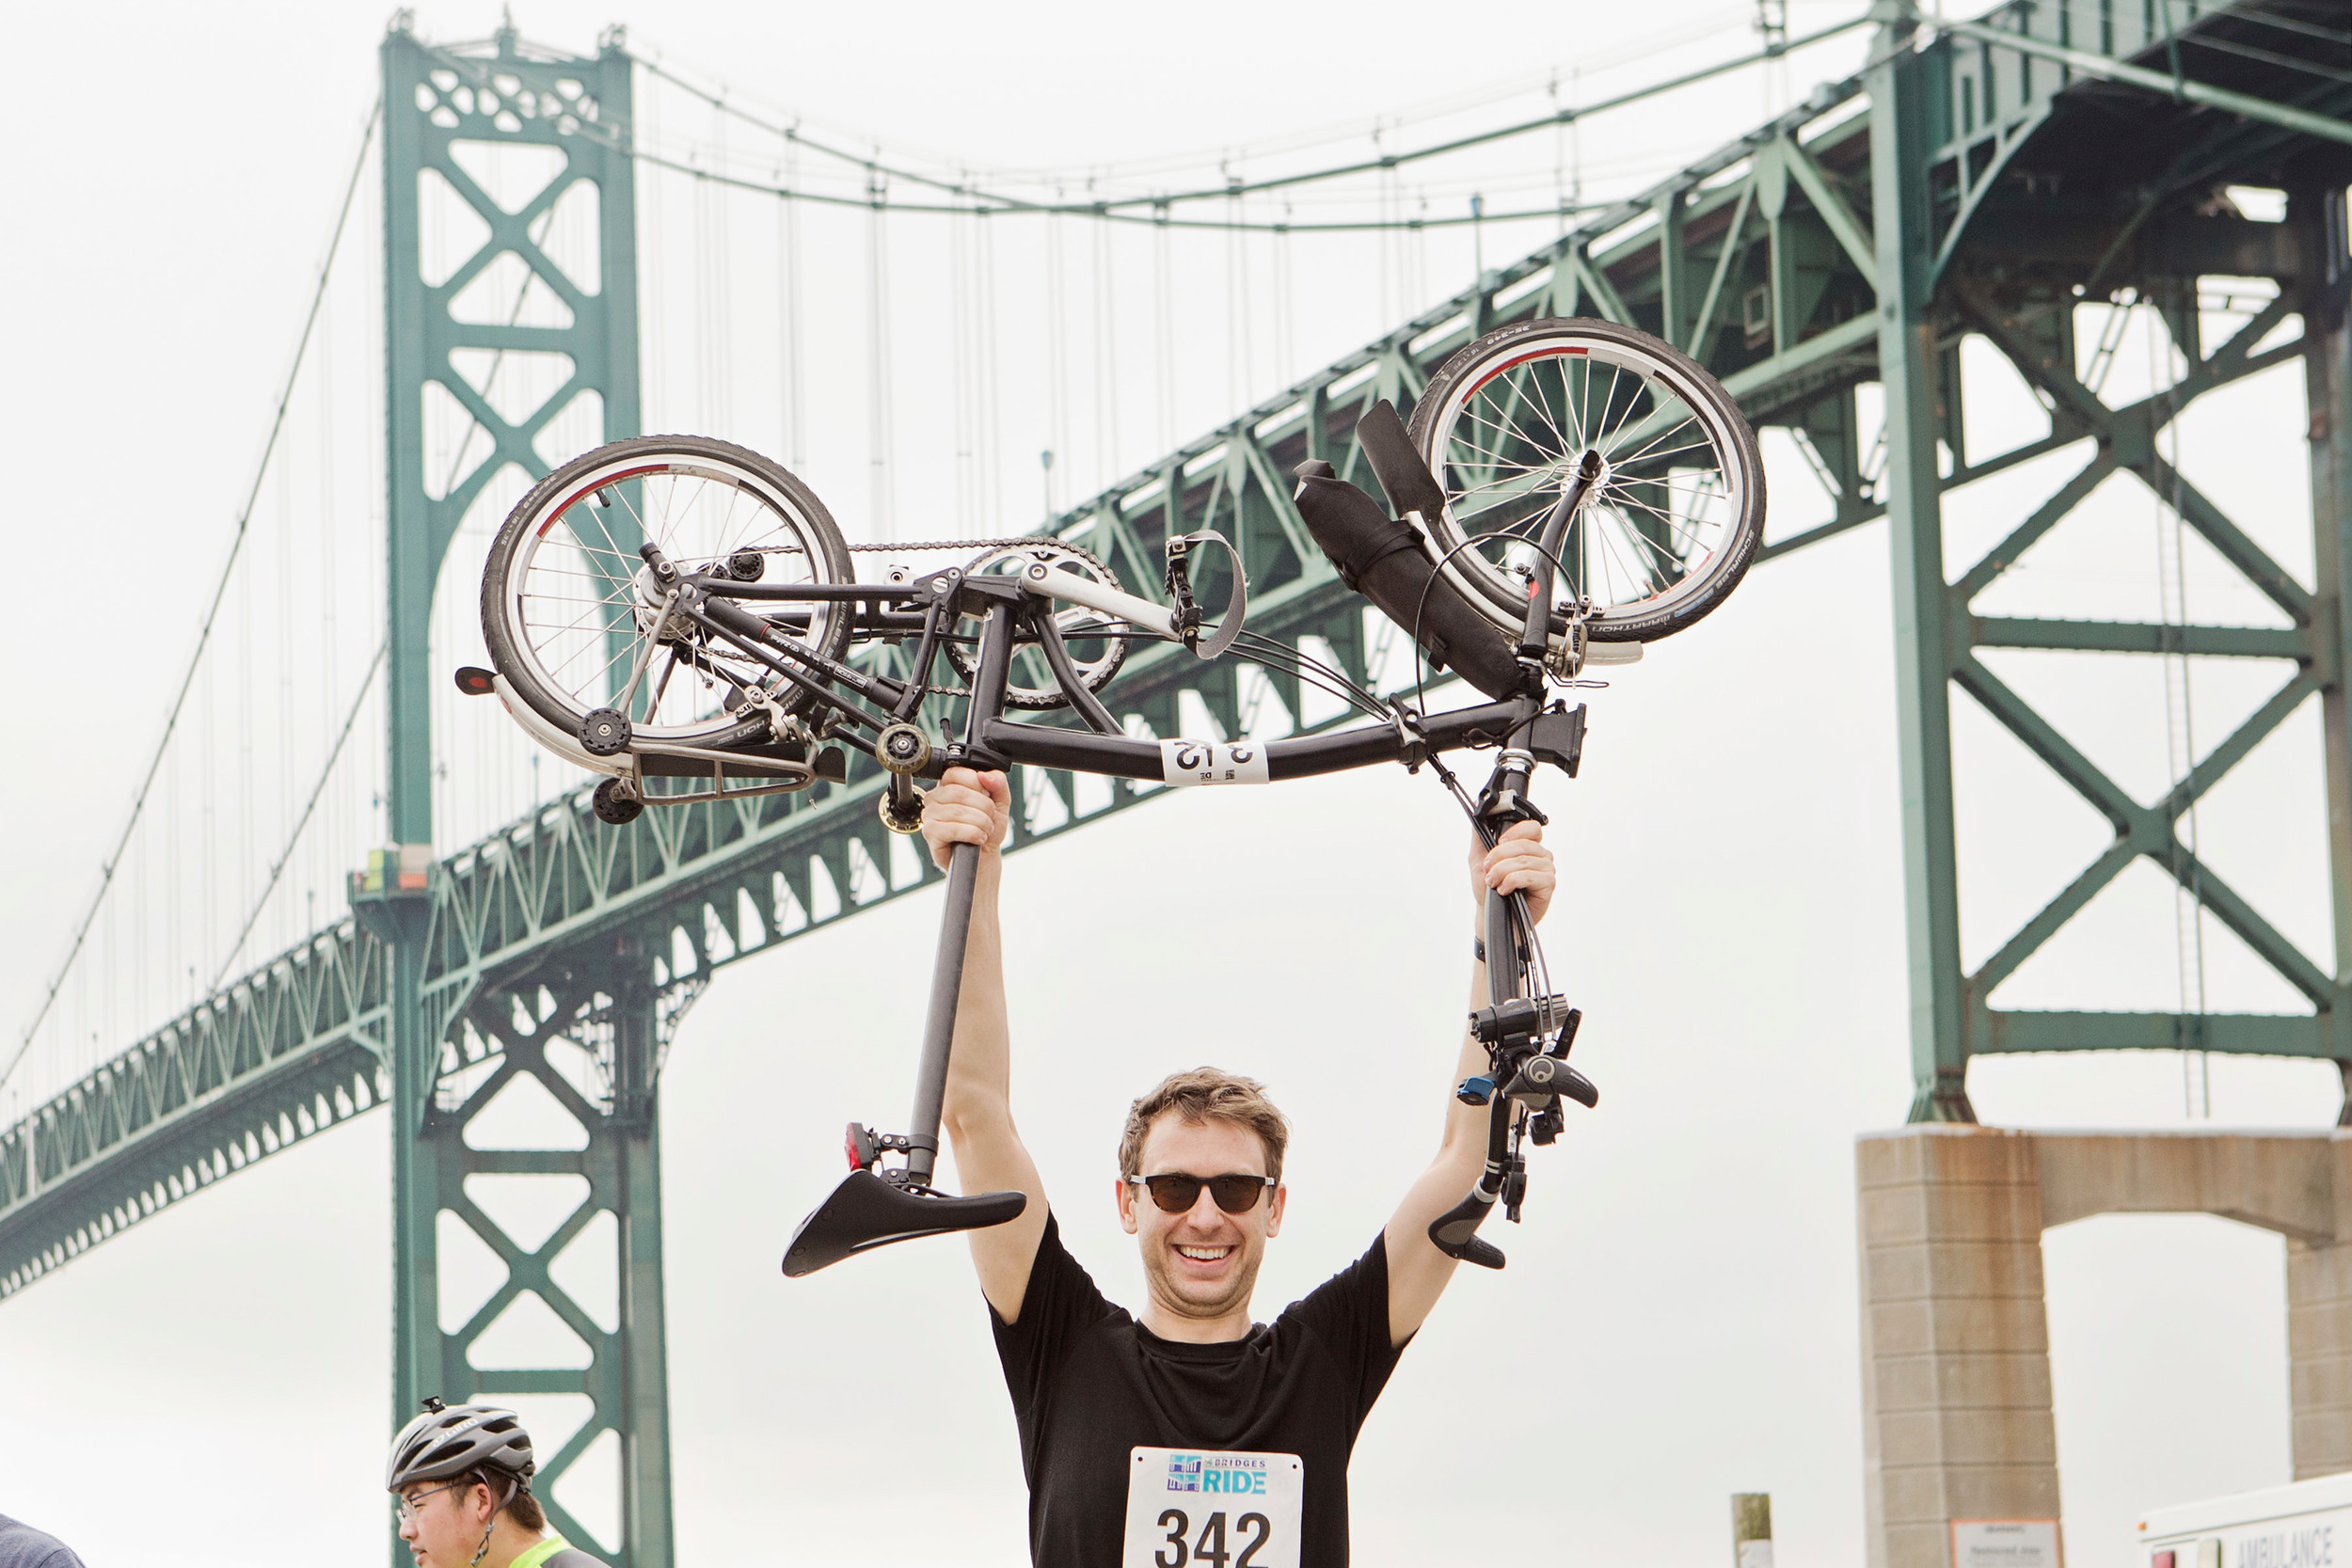 Alex Hanna of New York, N.Y. holds his bike up under the Mt. Hope Bridge in Bristol after completing the 26-mile 4 Bridges Ride. His father, Kim Hanna of Tiverton, also participated in the ride.